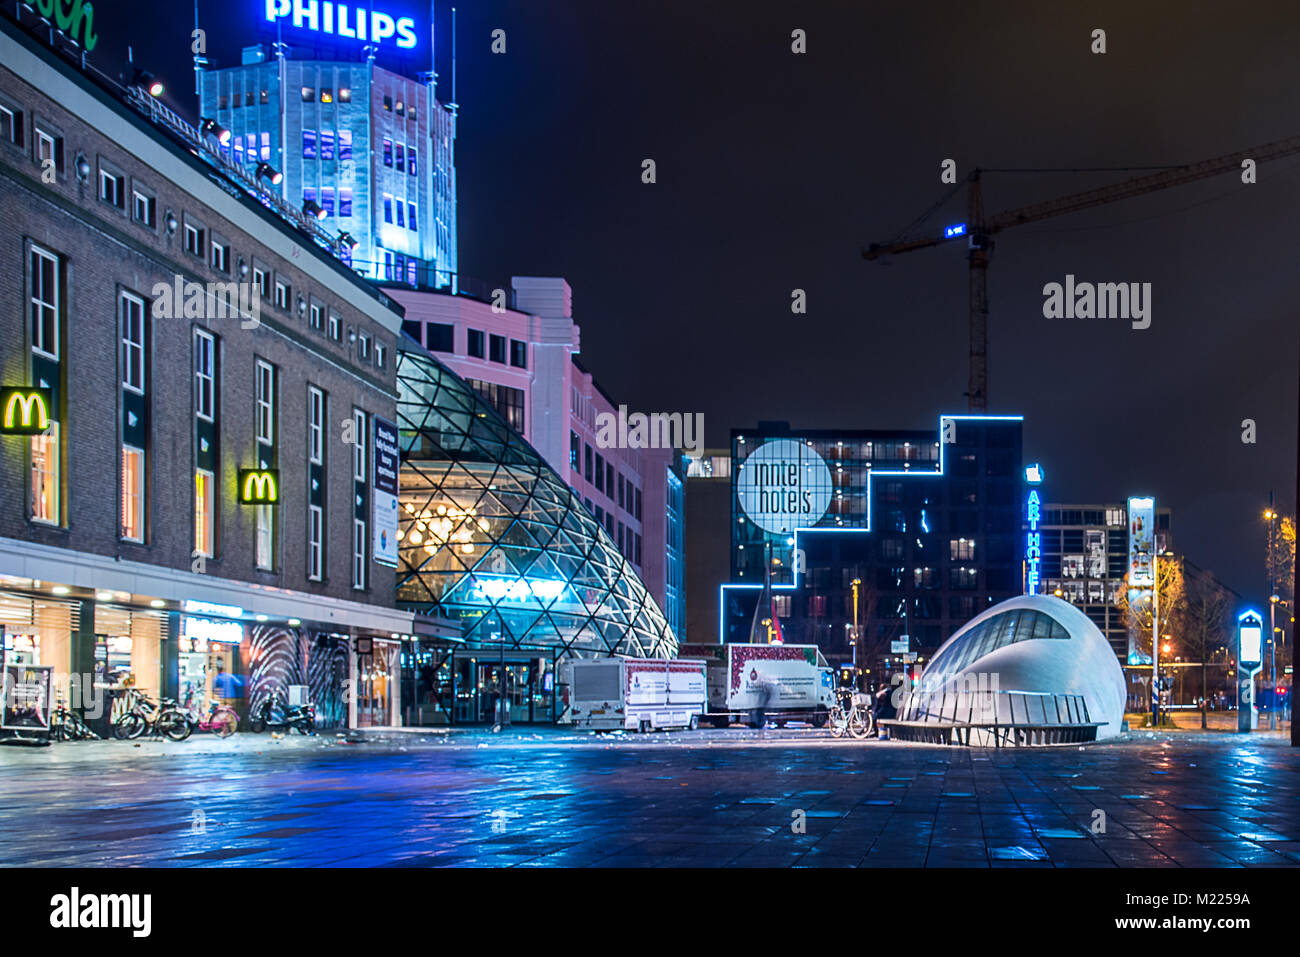 The Blob building in the centre of the city, Eindhoven, Netherlands Stock Photo